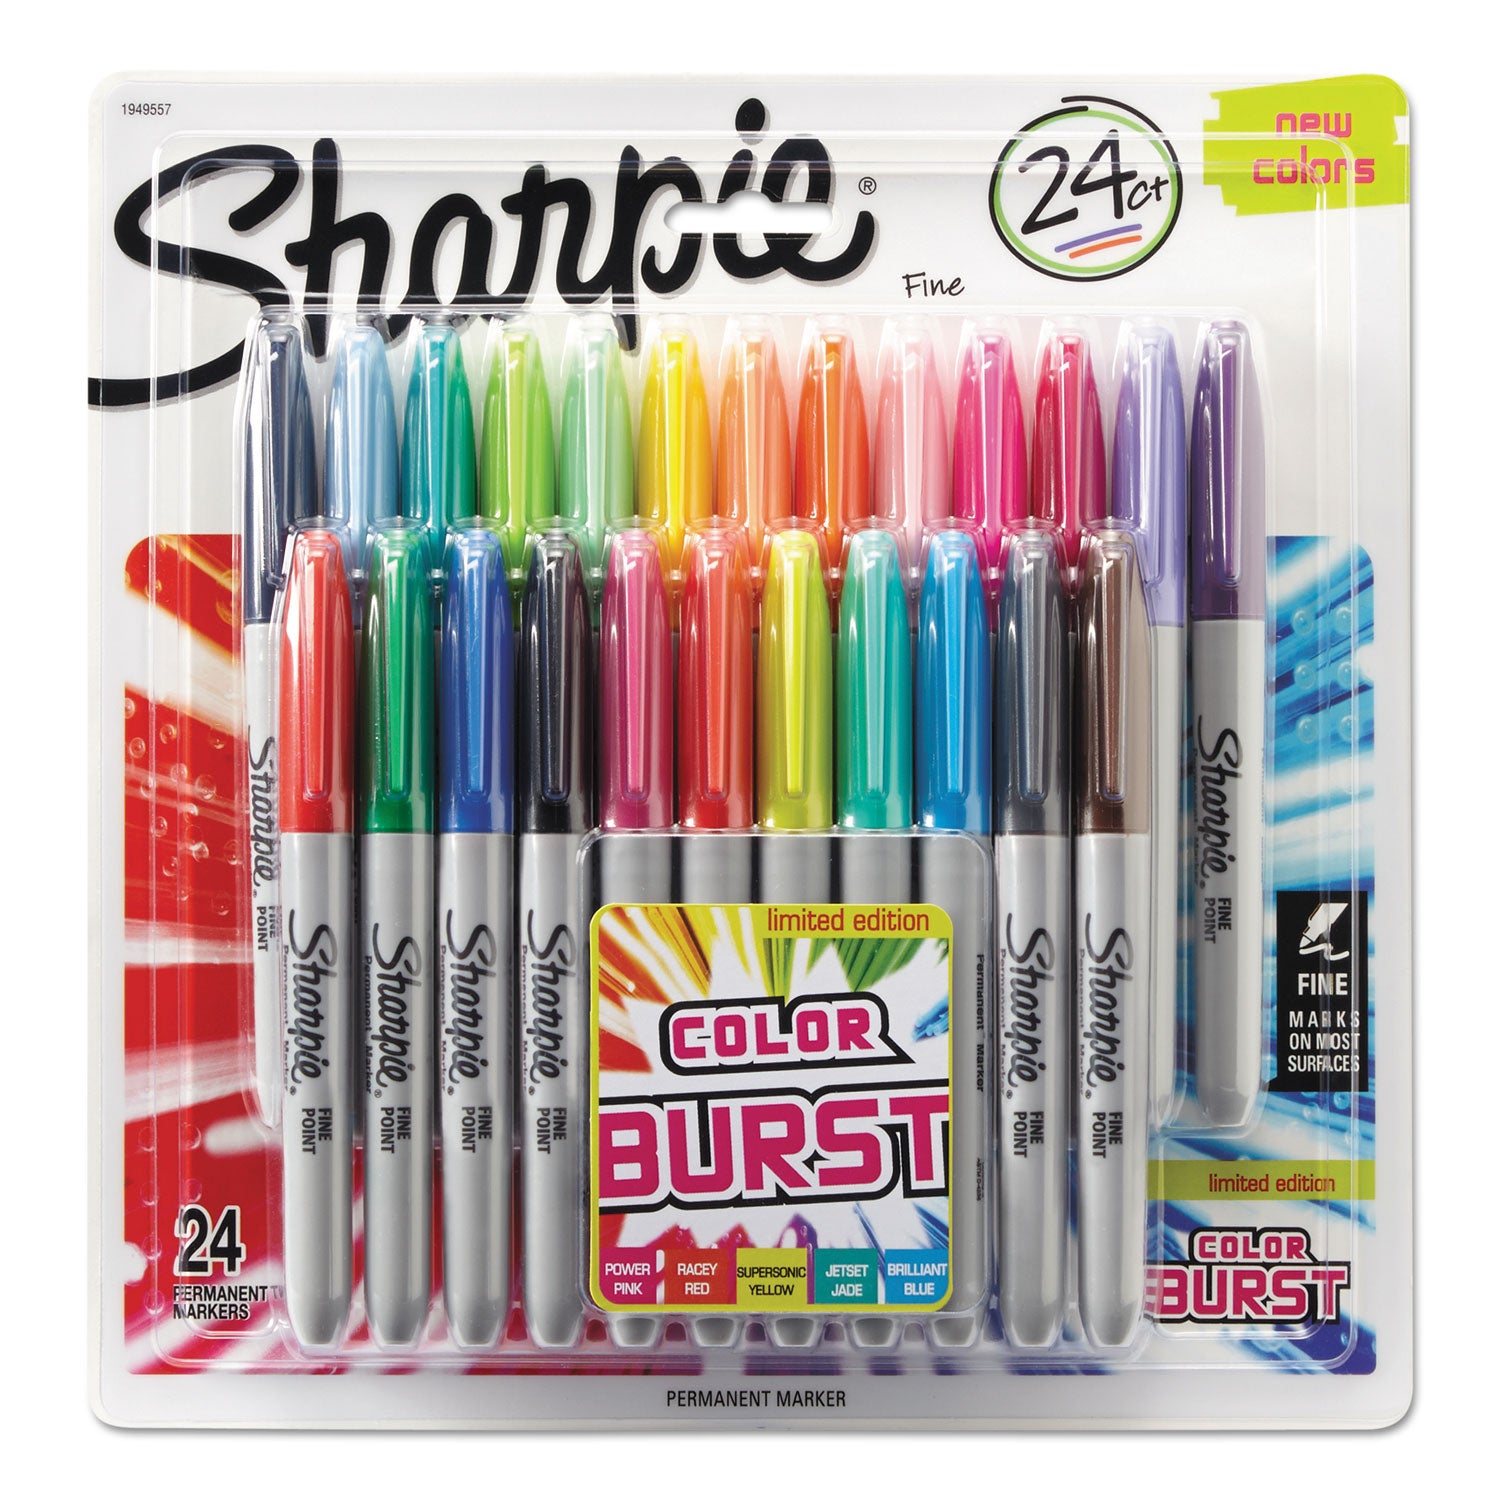 fine-tip-permanent-marker-fine-bullet-tip-assorted-classic-and-limited-edition-color-burst-colors-24-pack_san1949557 - 1